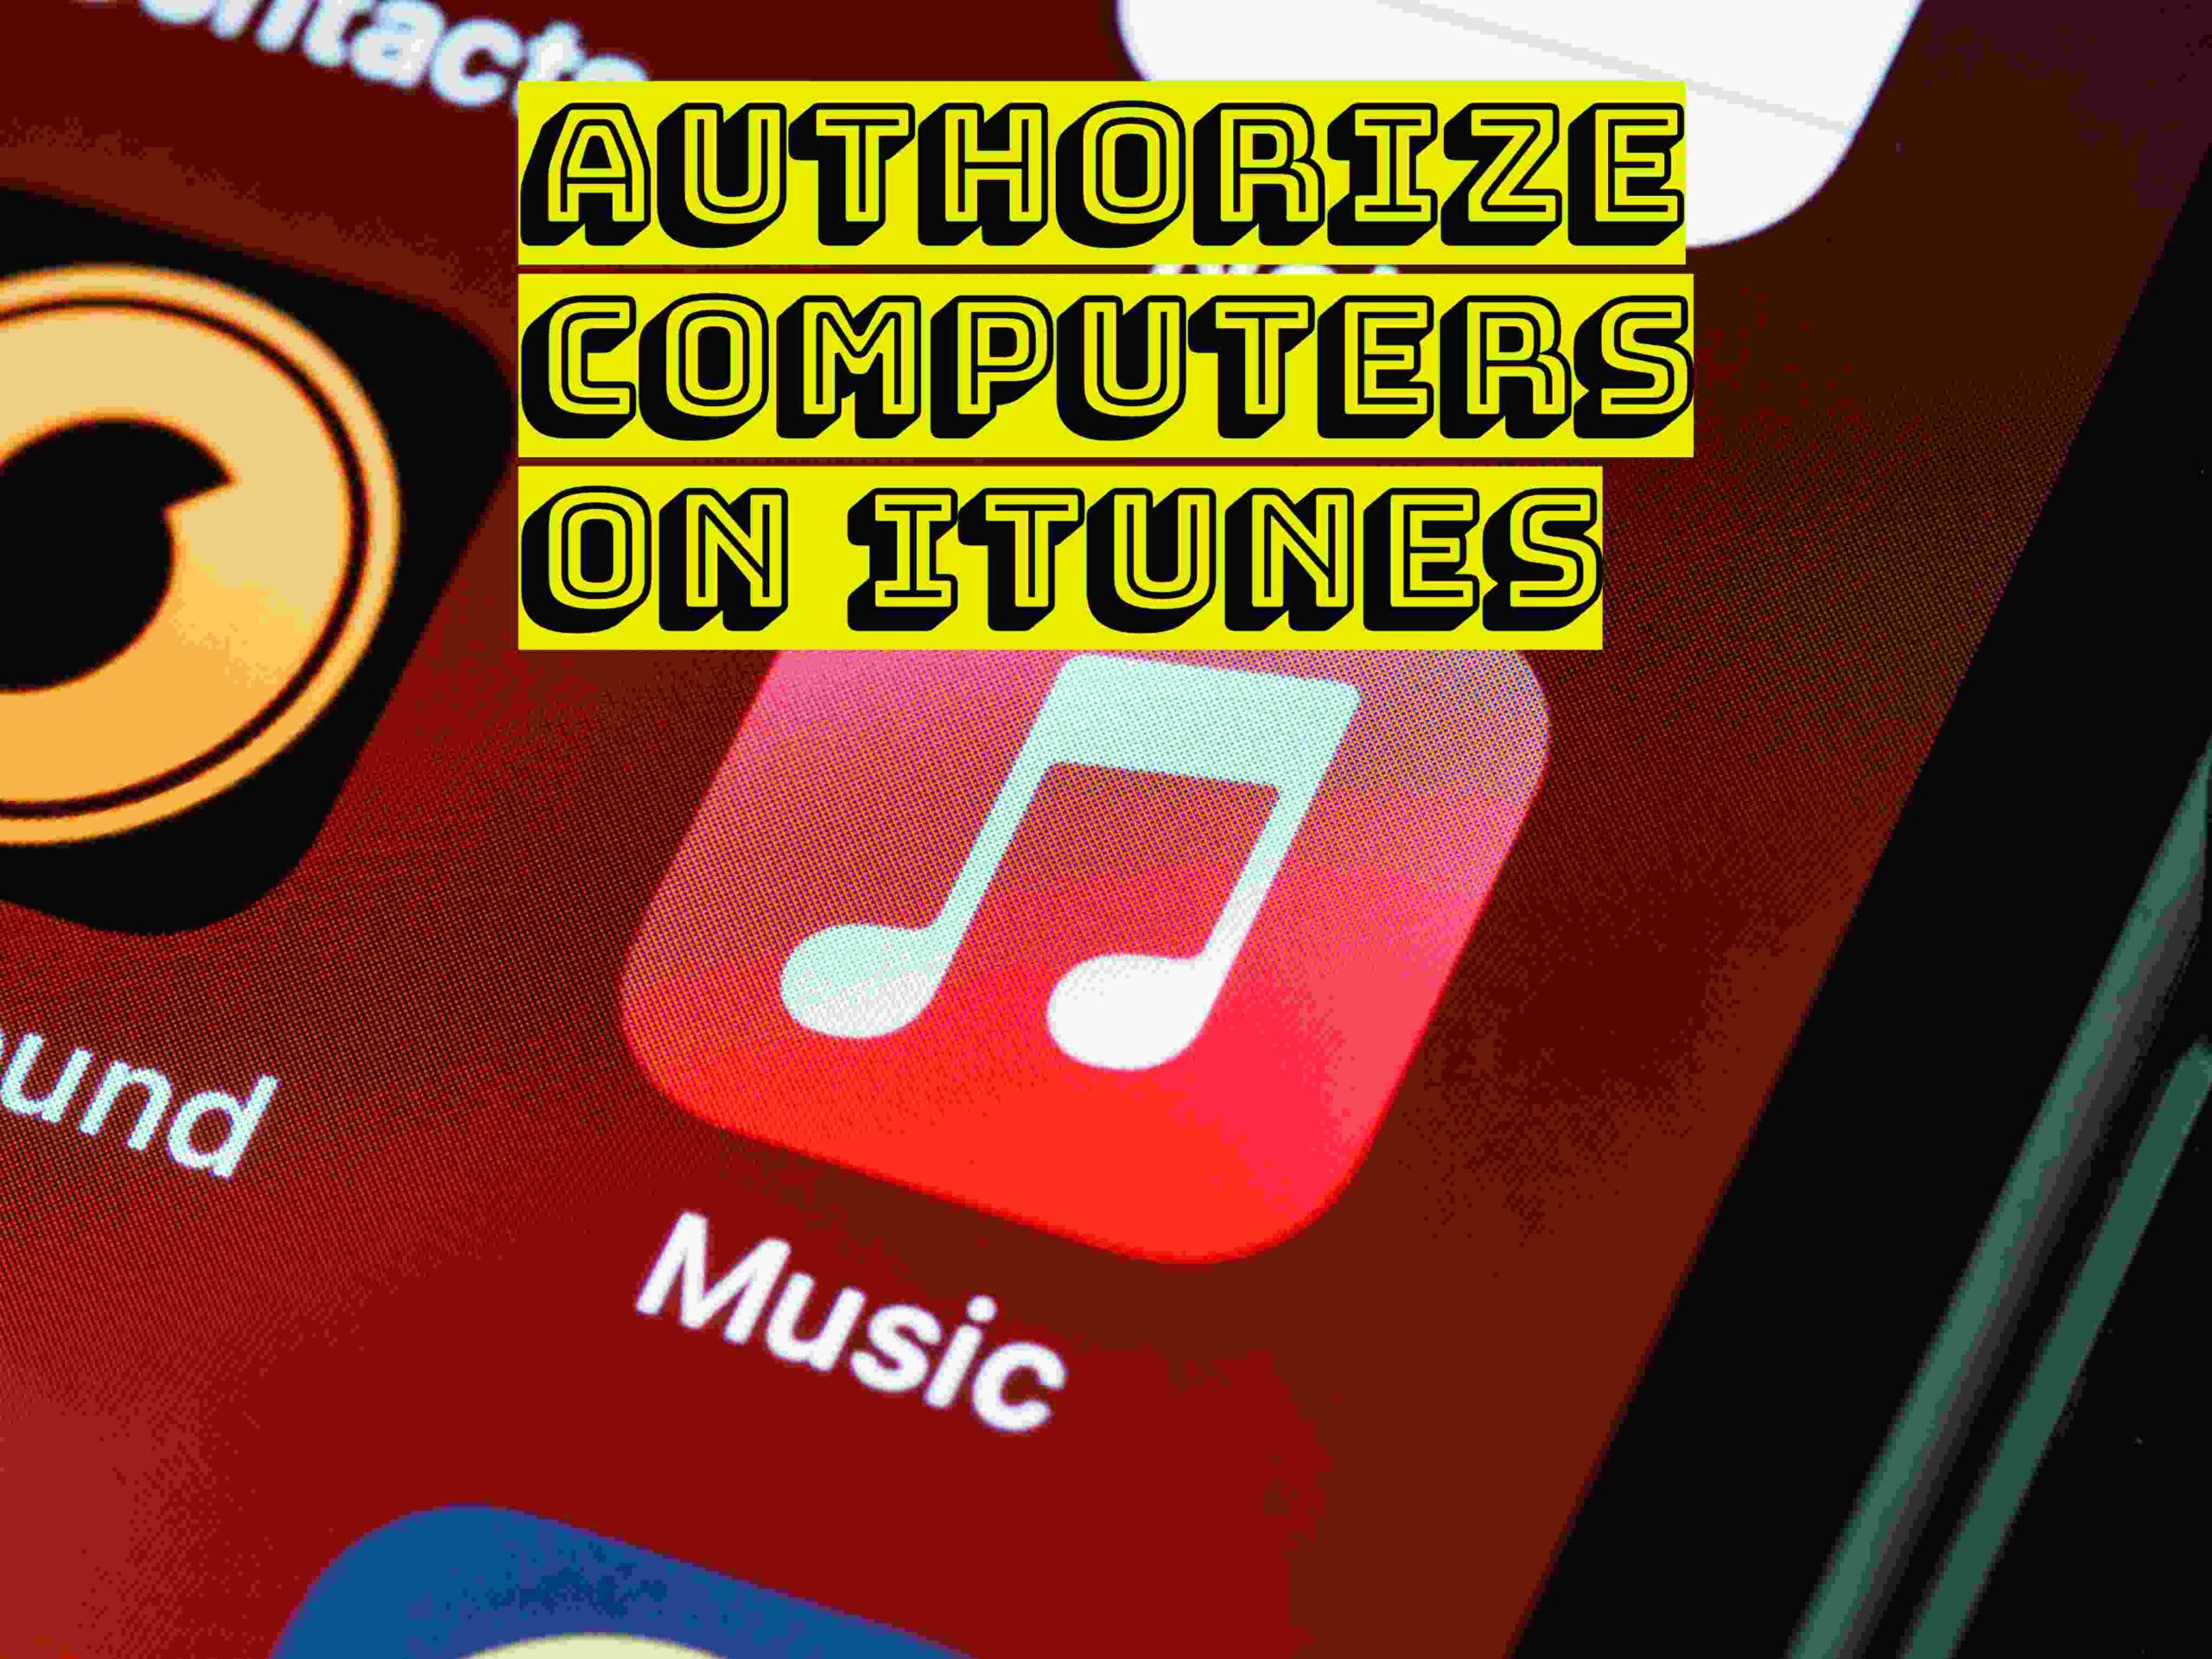 authorize computers on iTunes